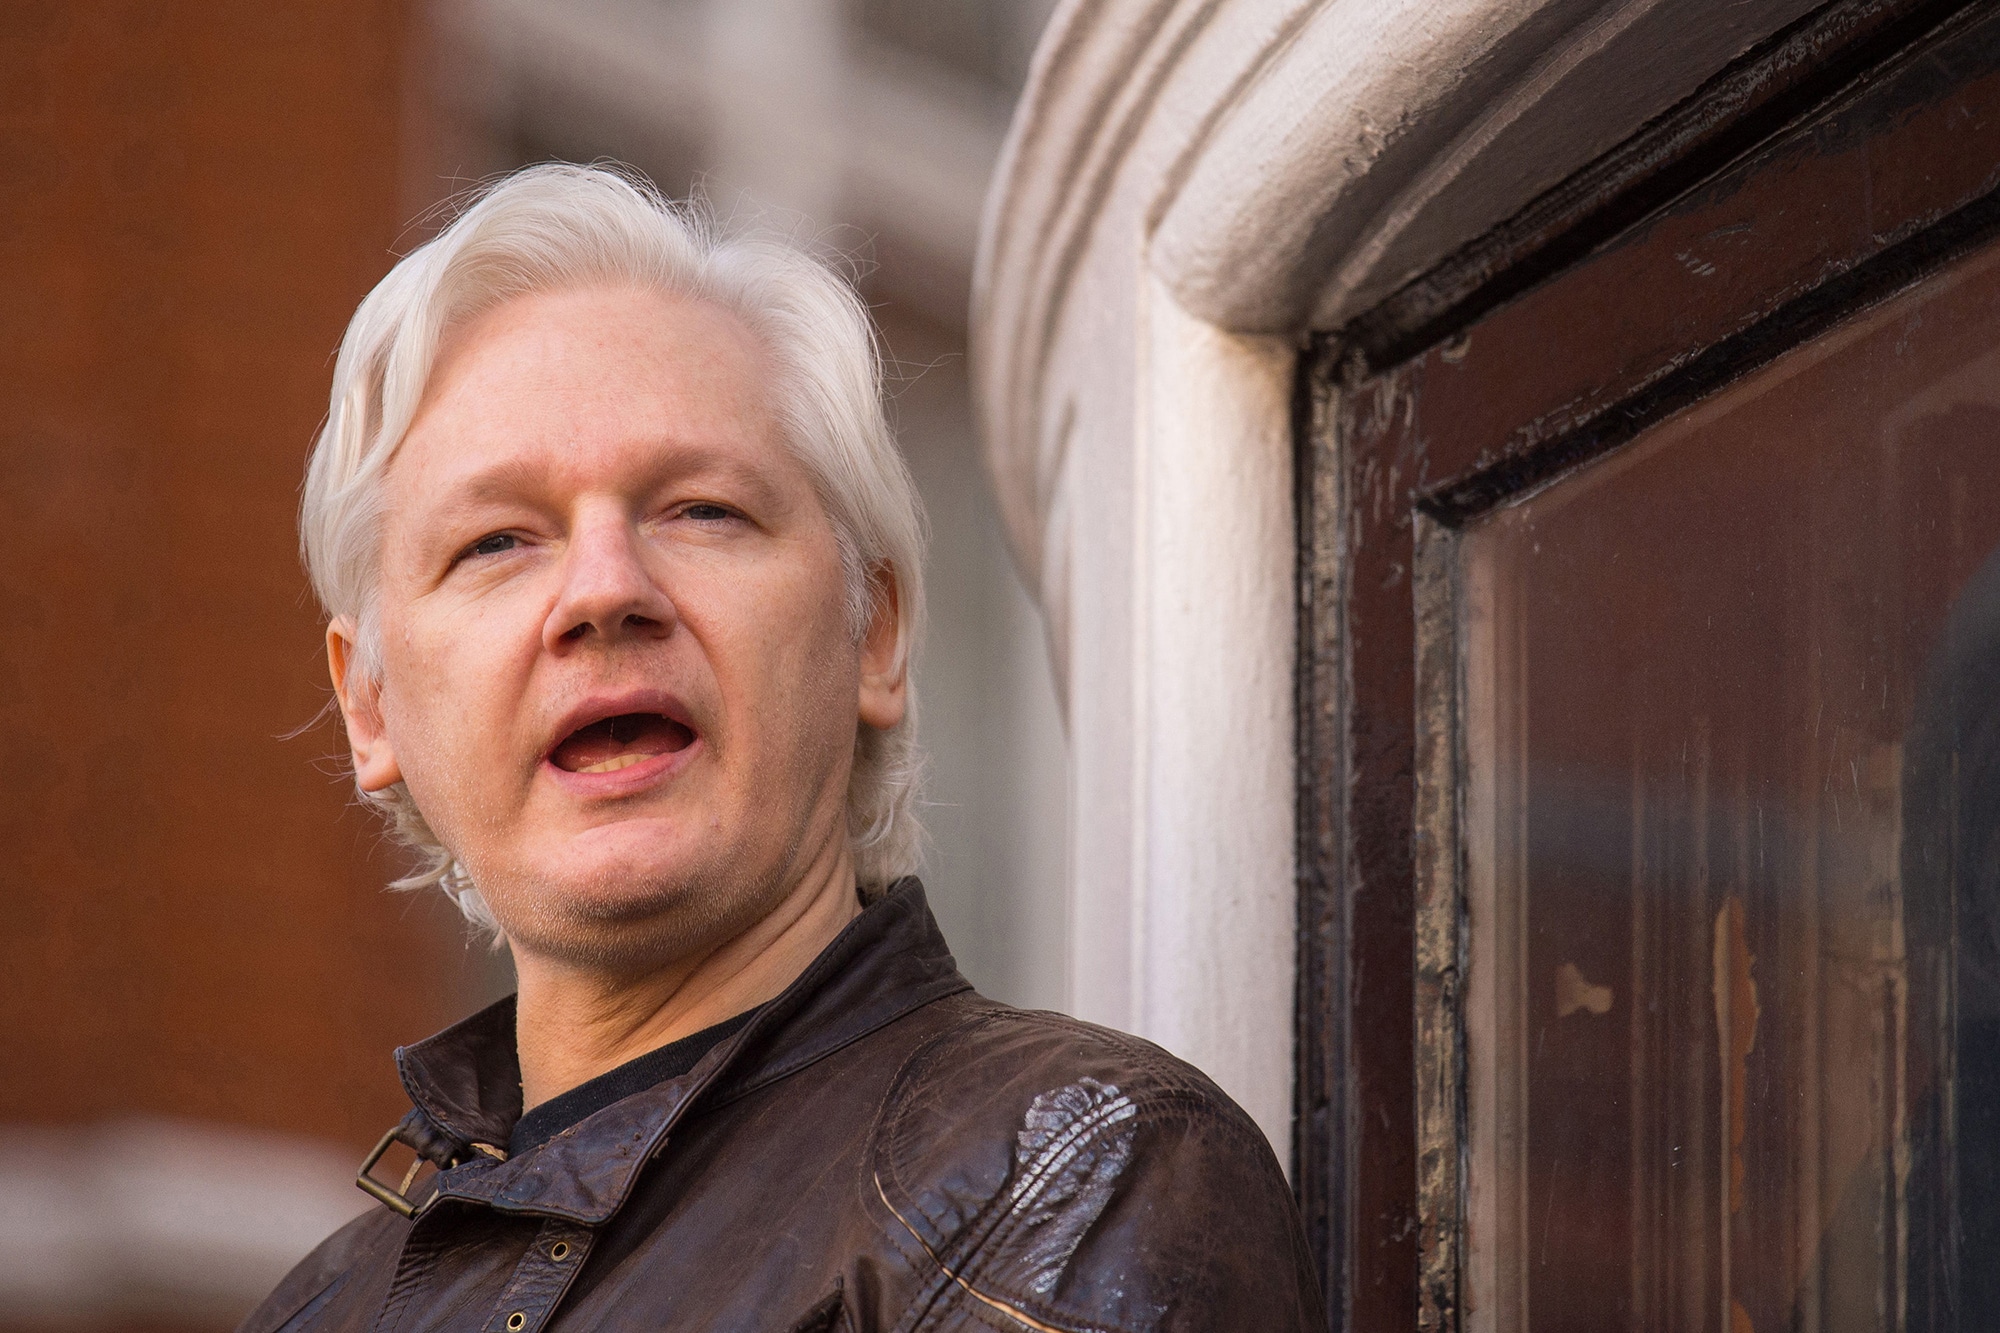 Reporters and Lawyers Sue CIA After Interviewing Wikileaks Founder